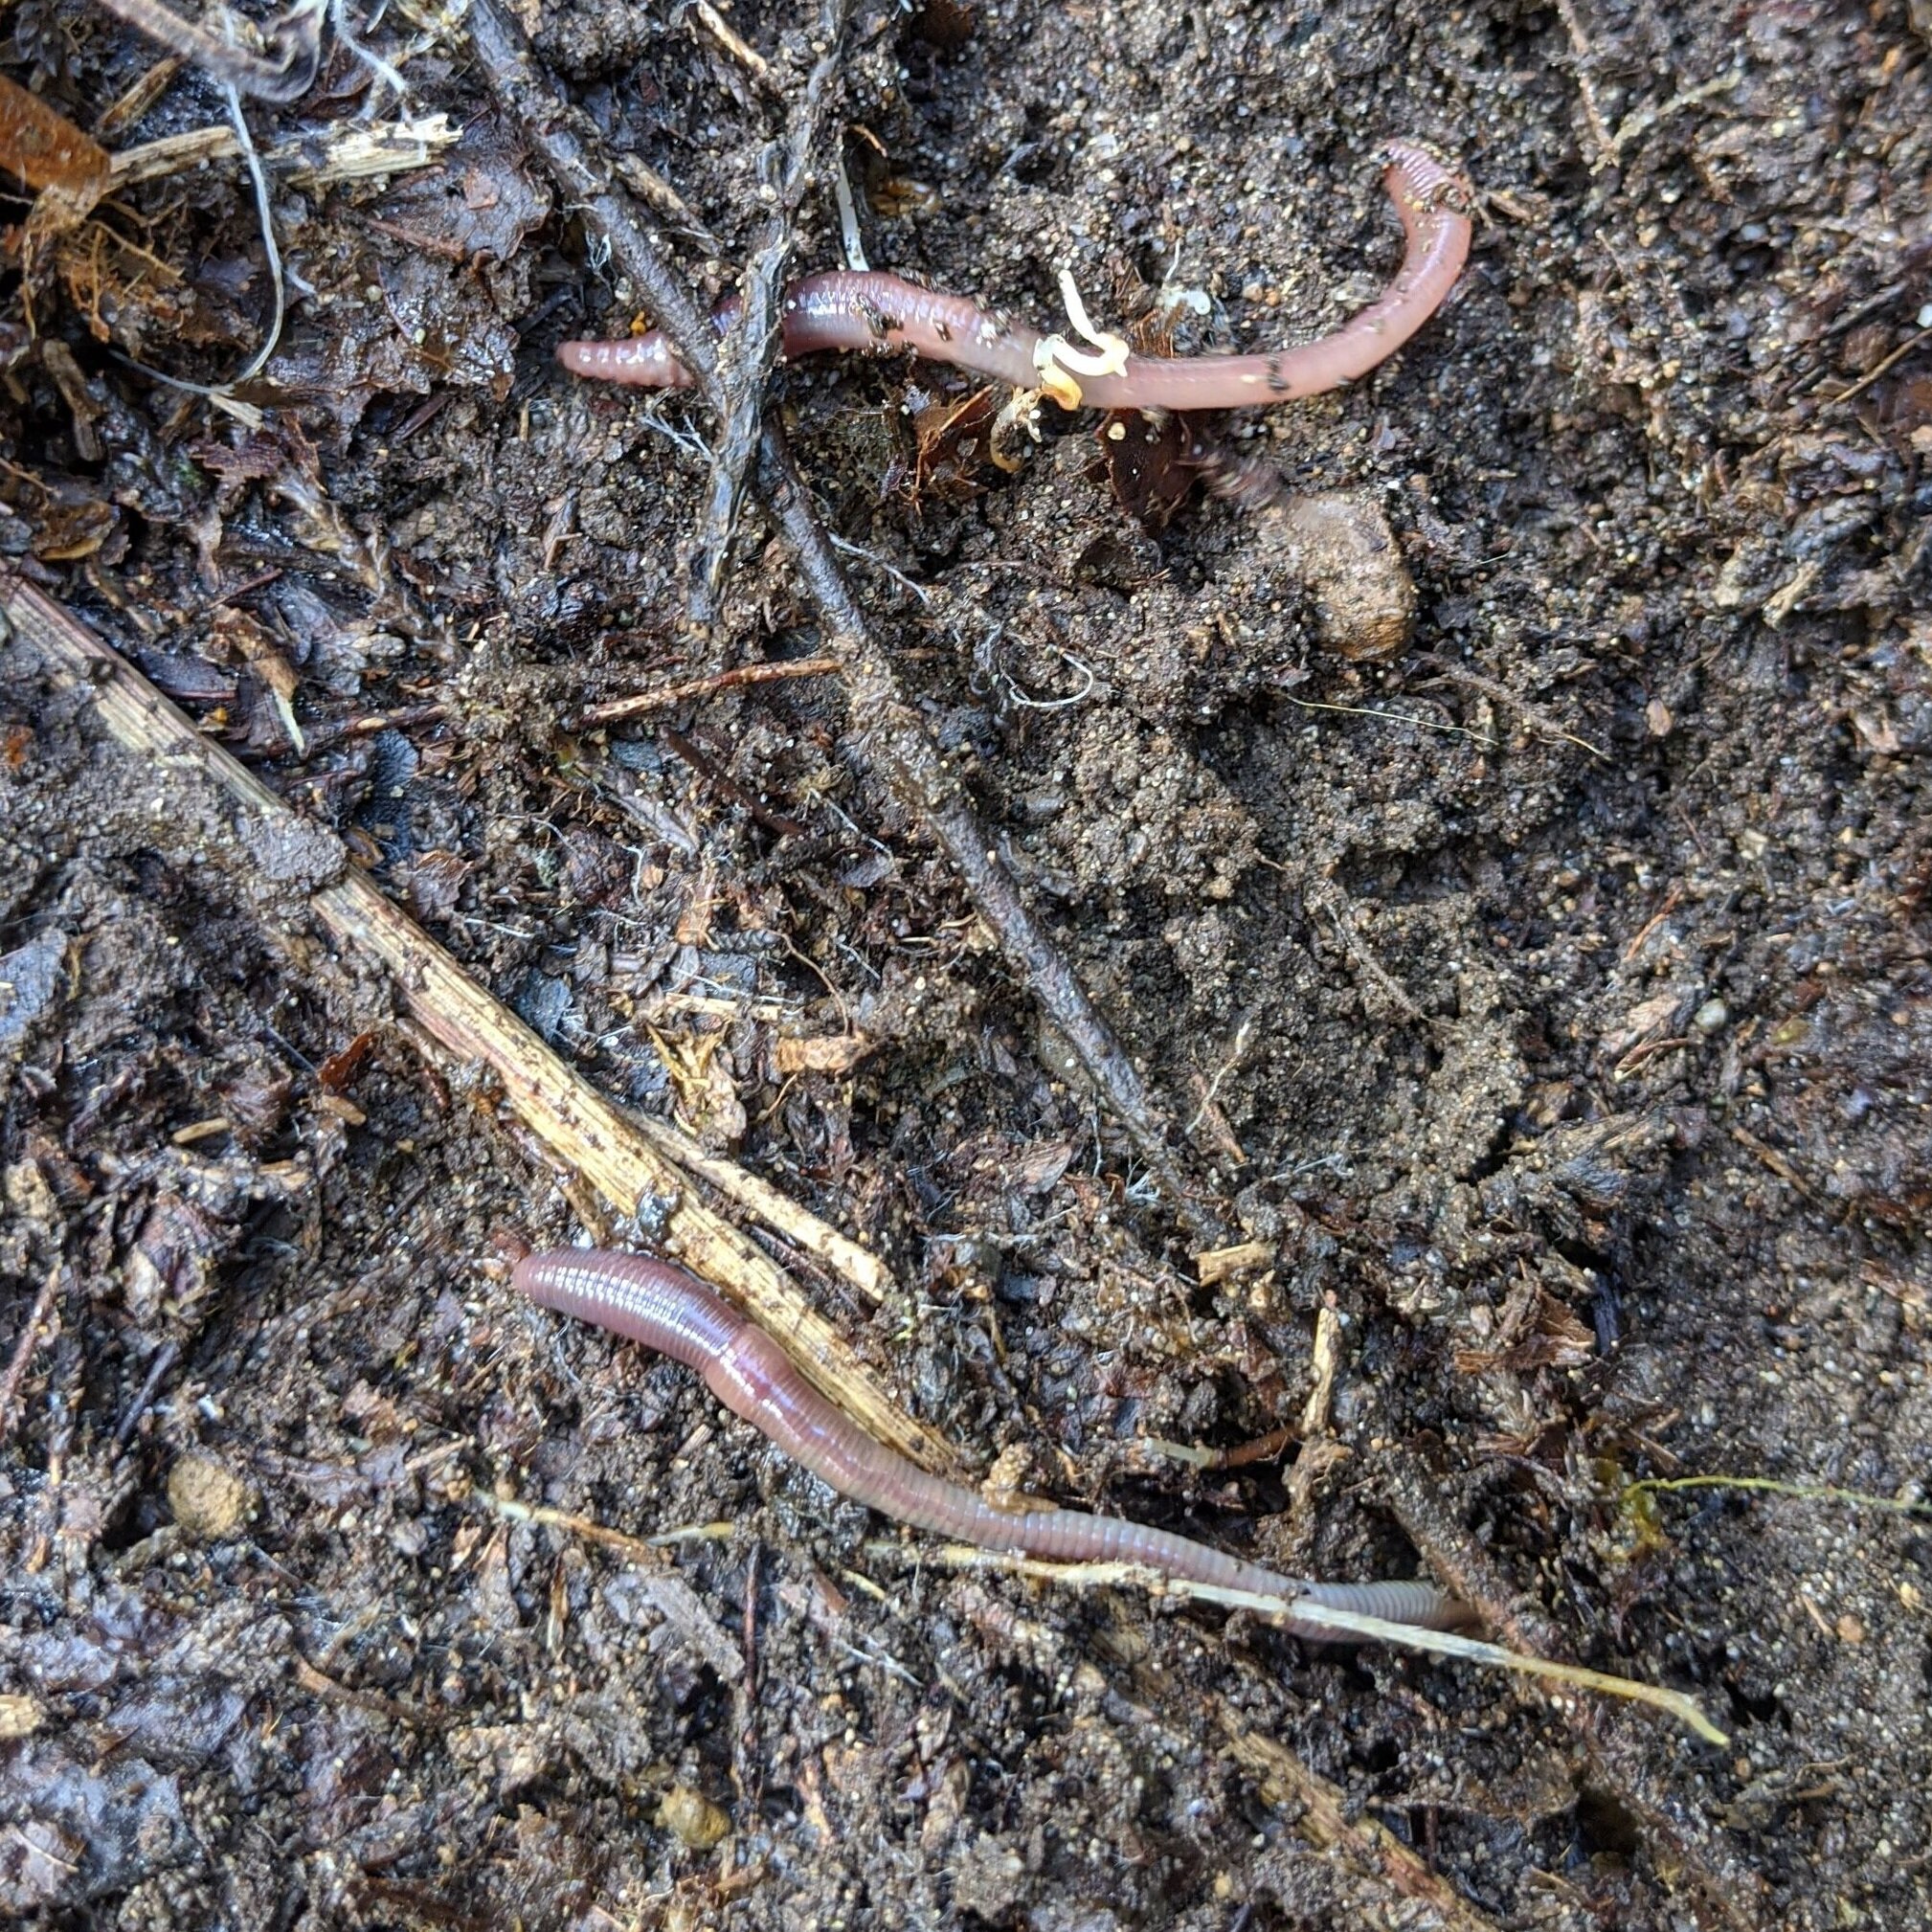 Sound View Camp - Family Campground / Outdoor Environmental Education -  Worms!